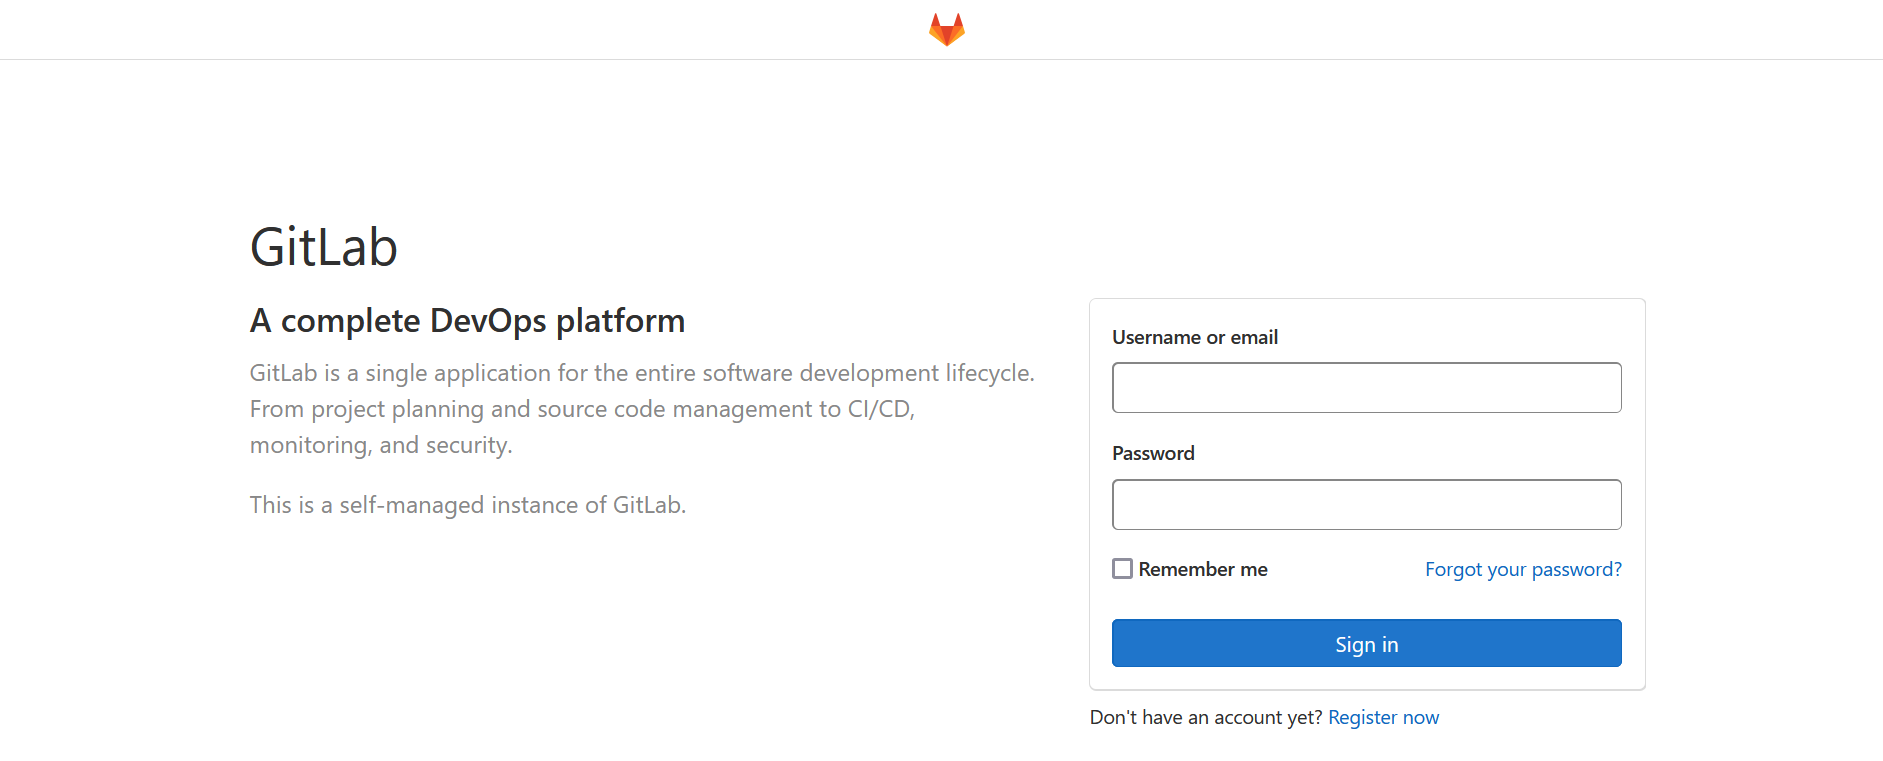 gitlab-welcome.png